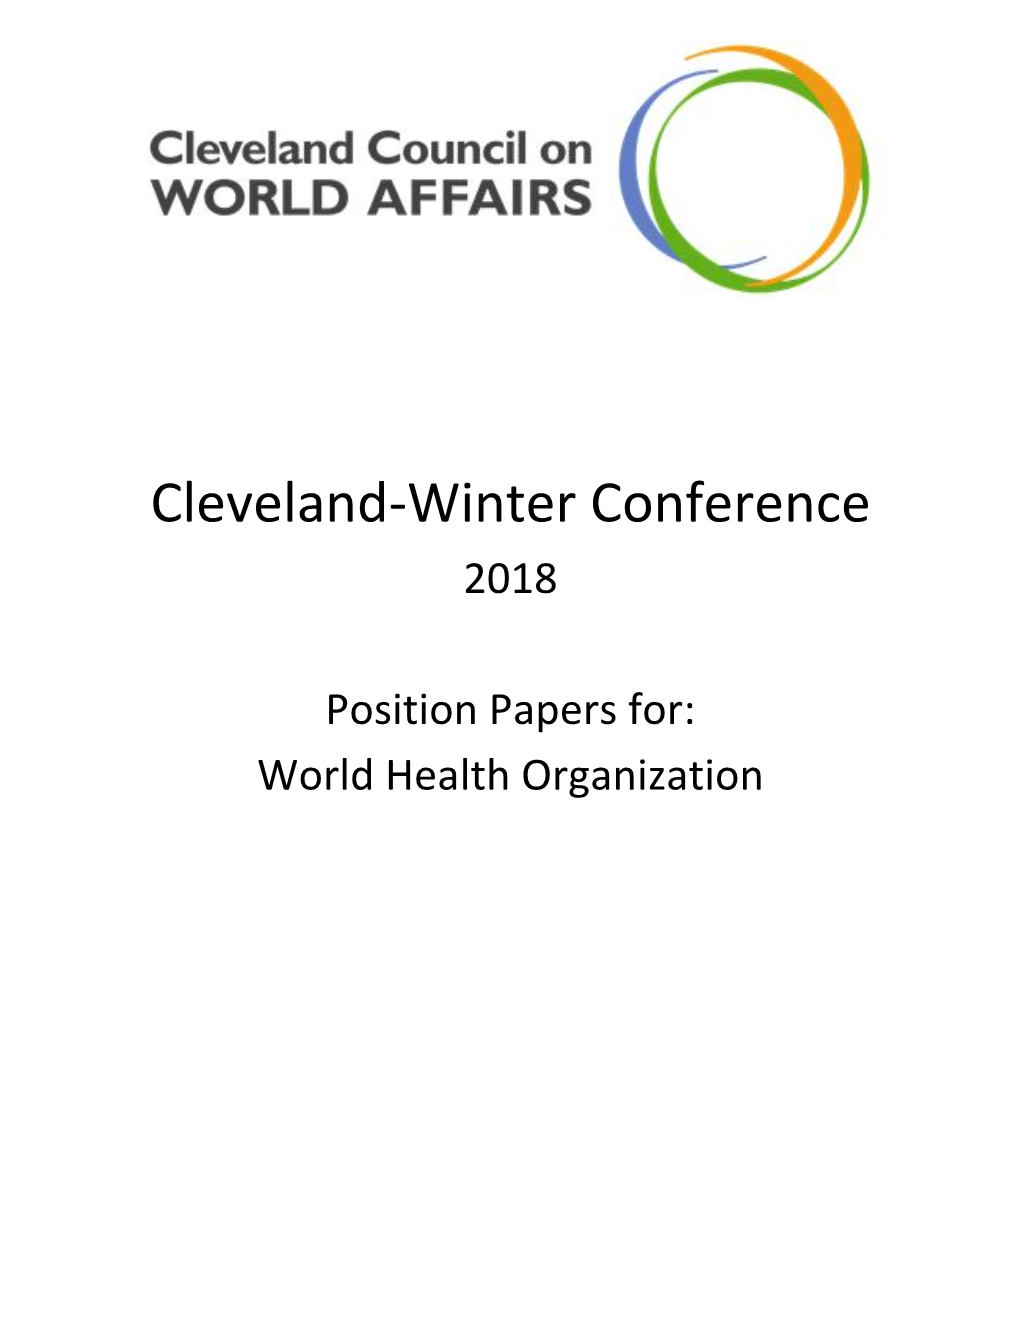 Cleveland-Winter Conference 2018